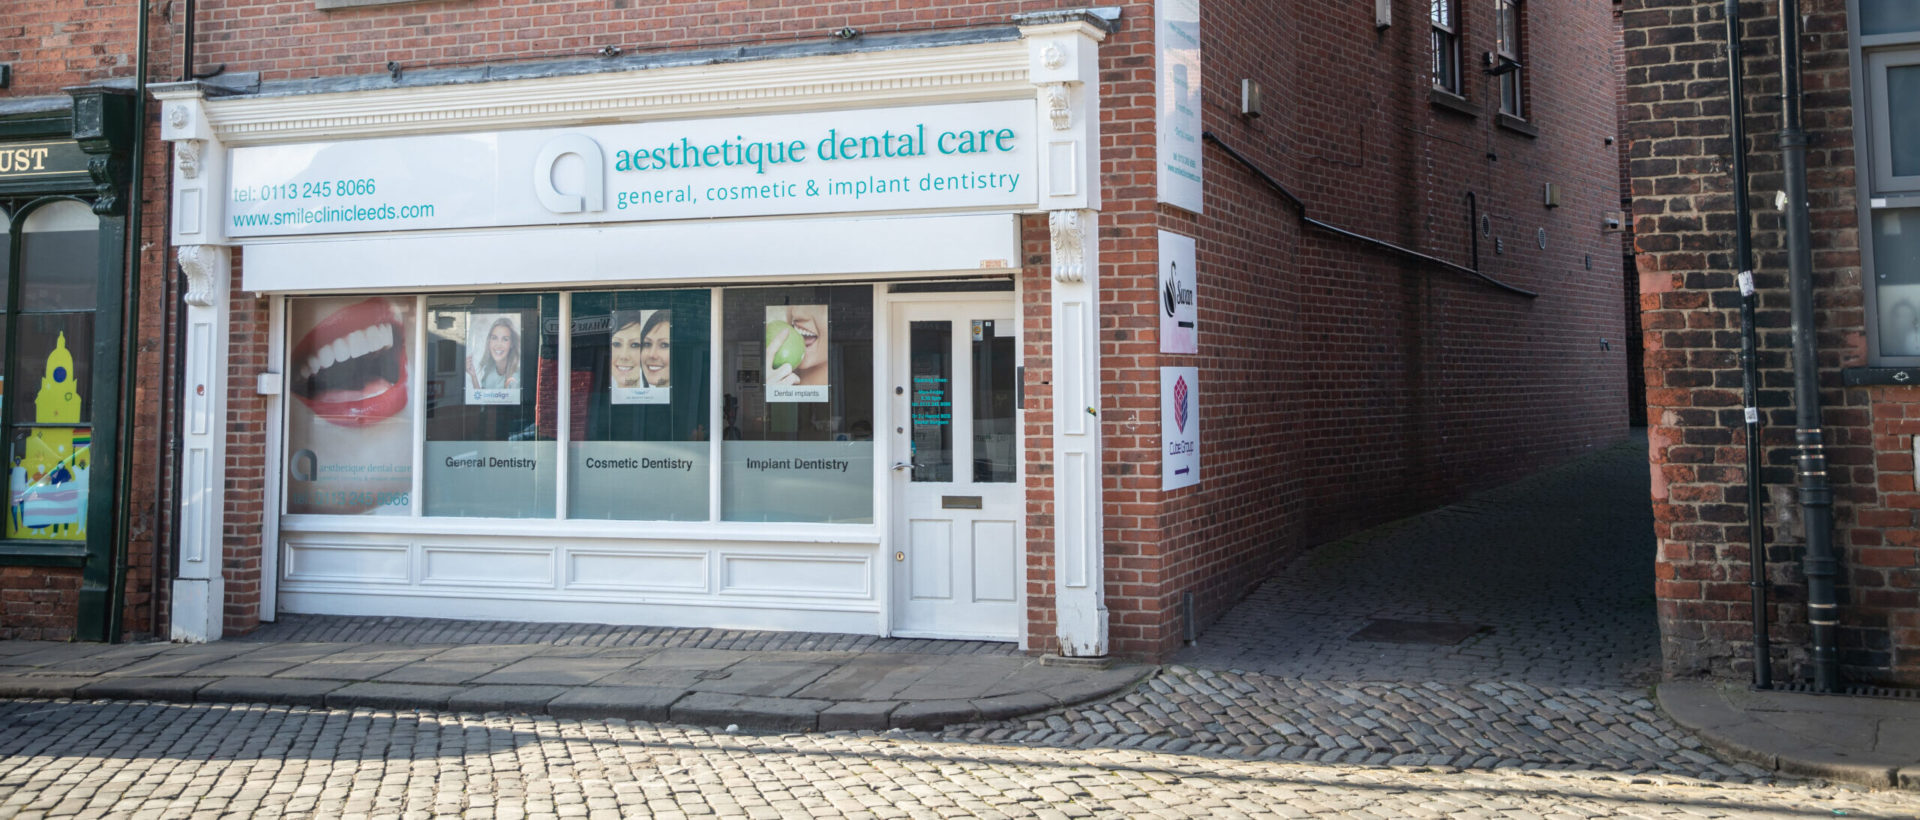 Aestheique Dental Care office